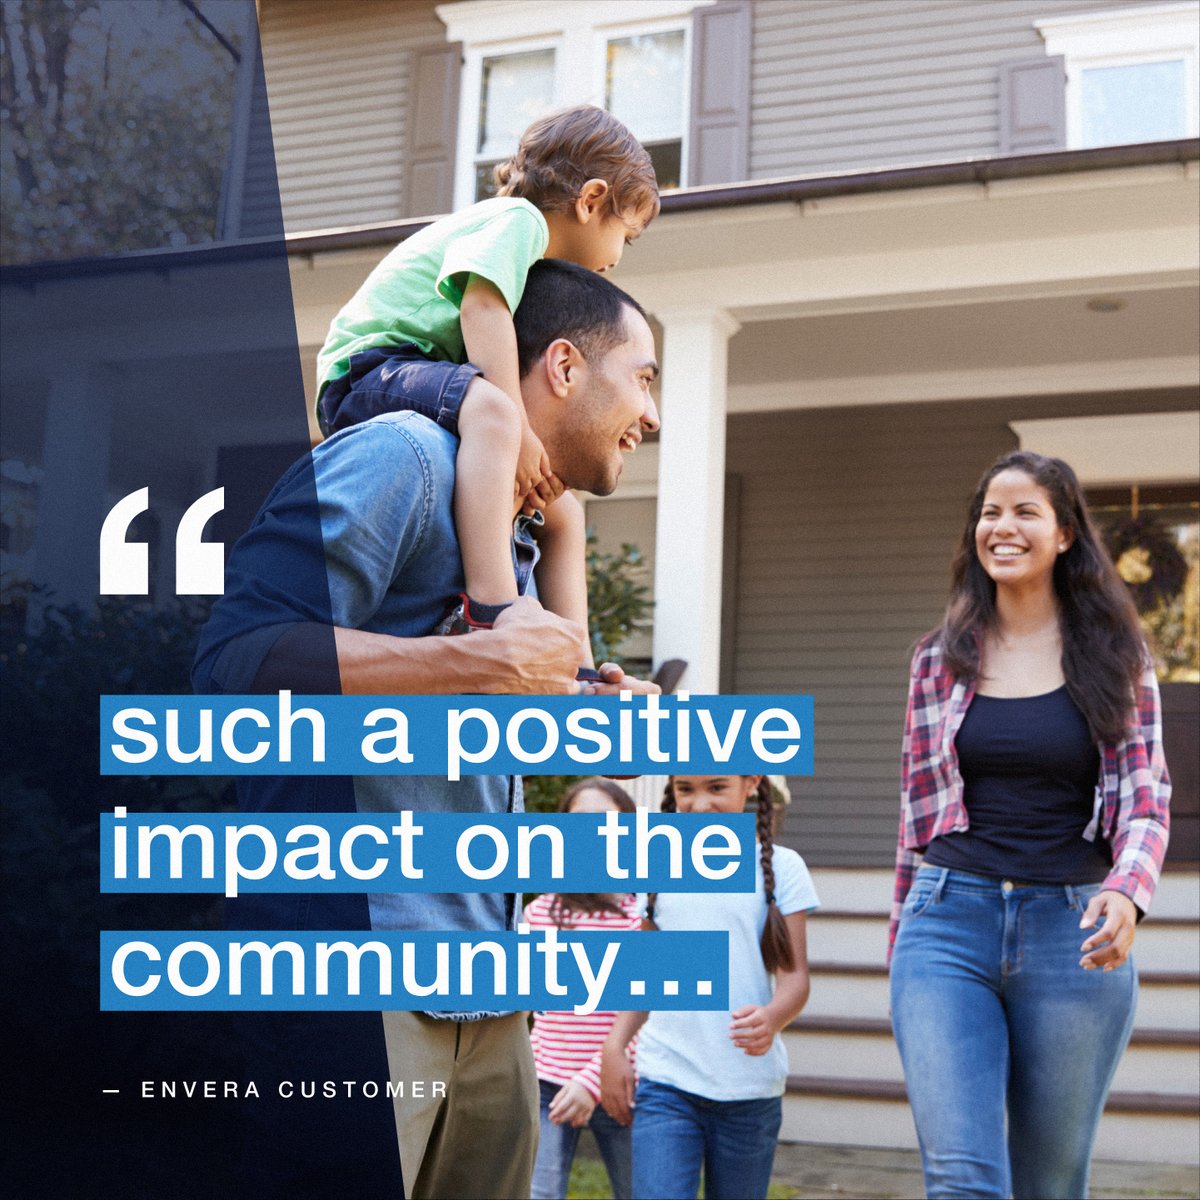 After installing Envera's access management systems at the #gatedcommunity entrance, residents in a #Texasneighborhood thanked the board president for 'making such a positive impact on the community by finding Envera.' enverasystems.com/hoa-in-flower-… #virtualsecuritysolutions